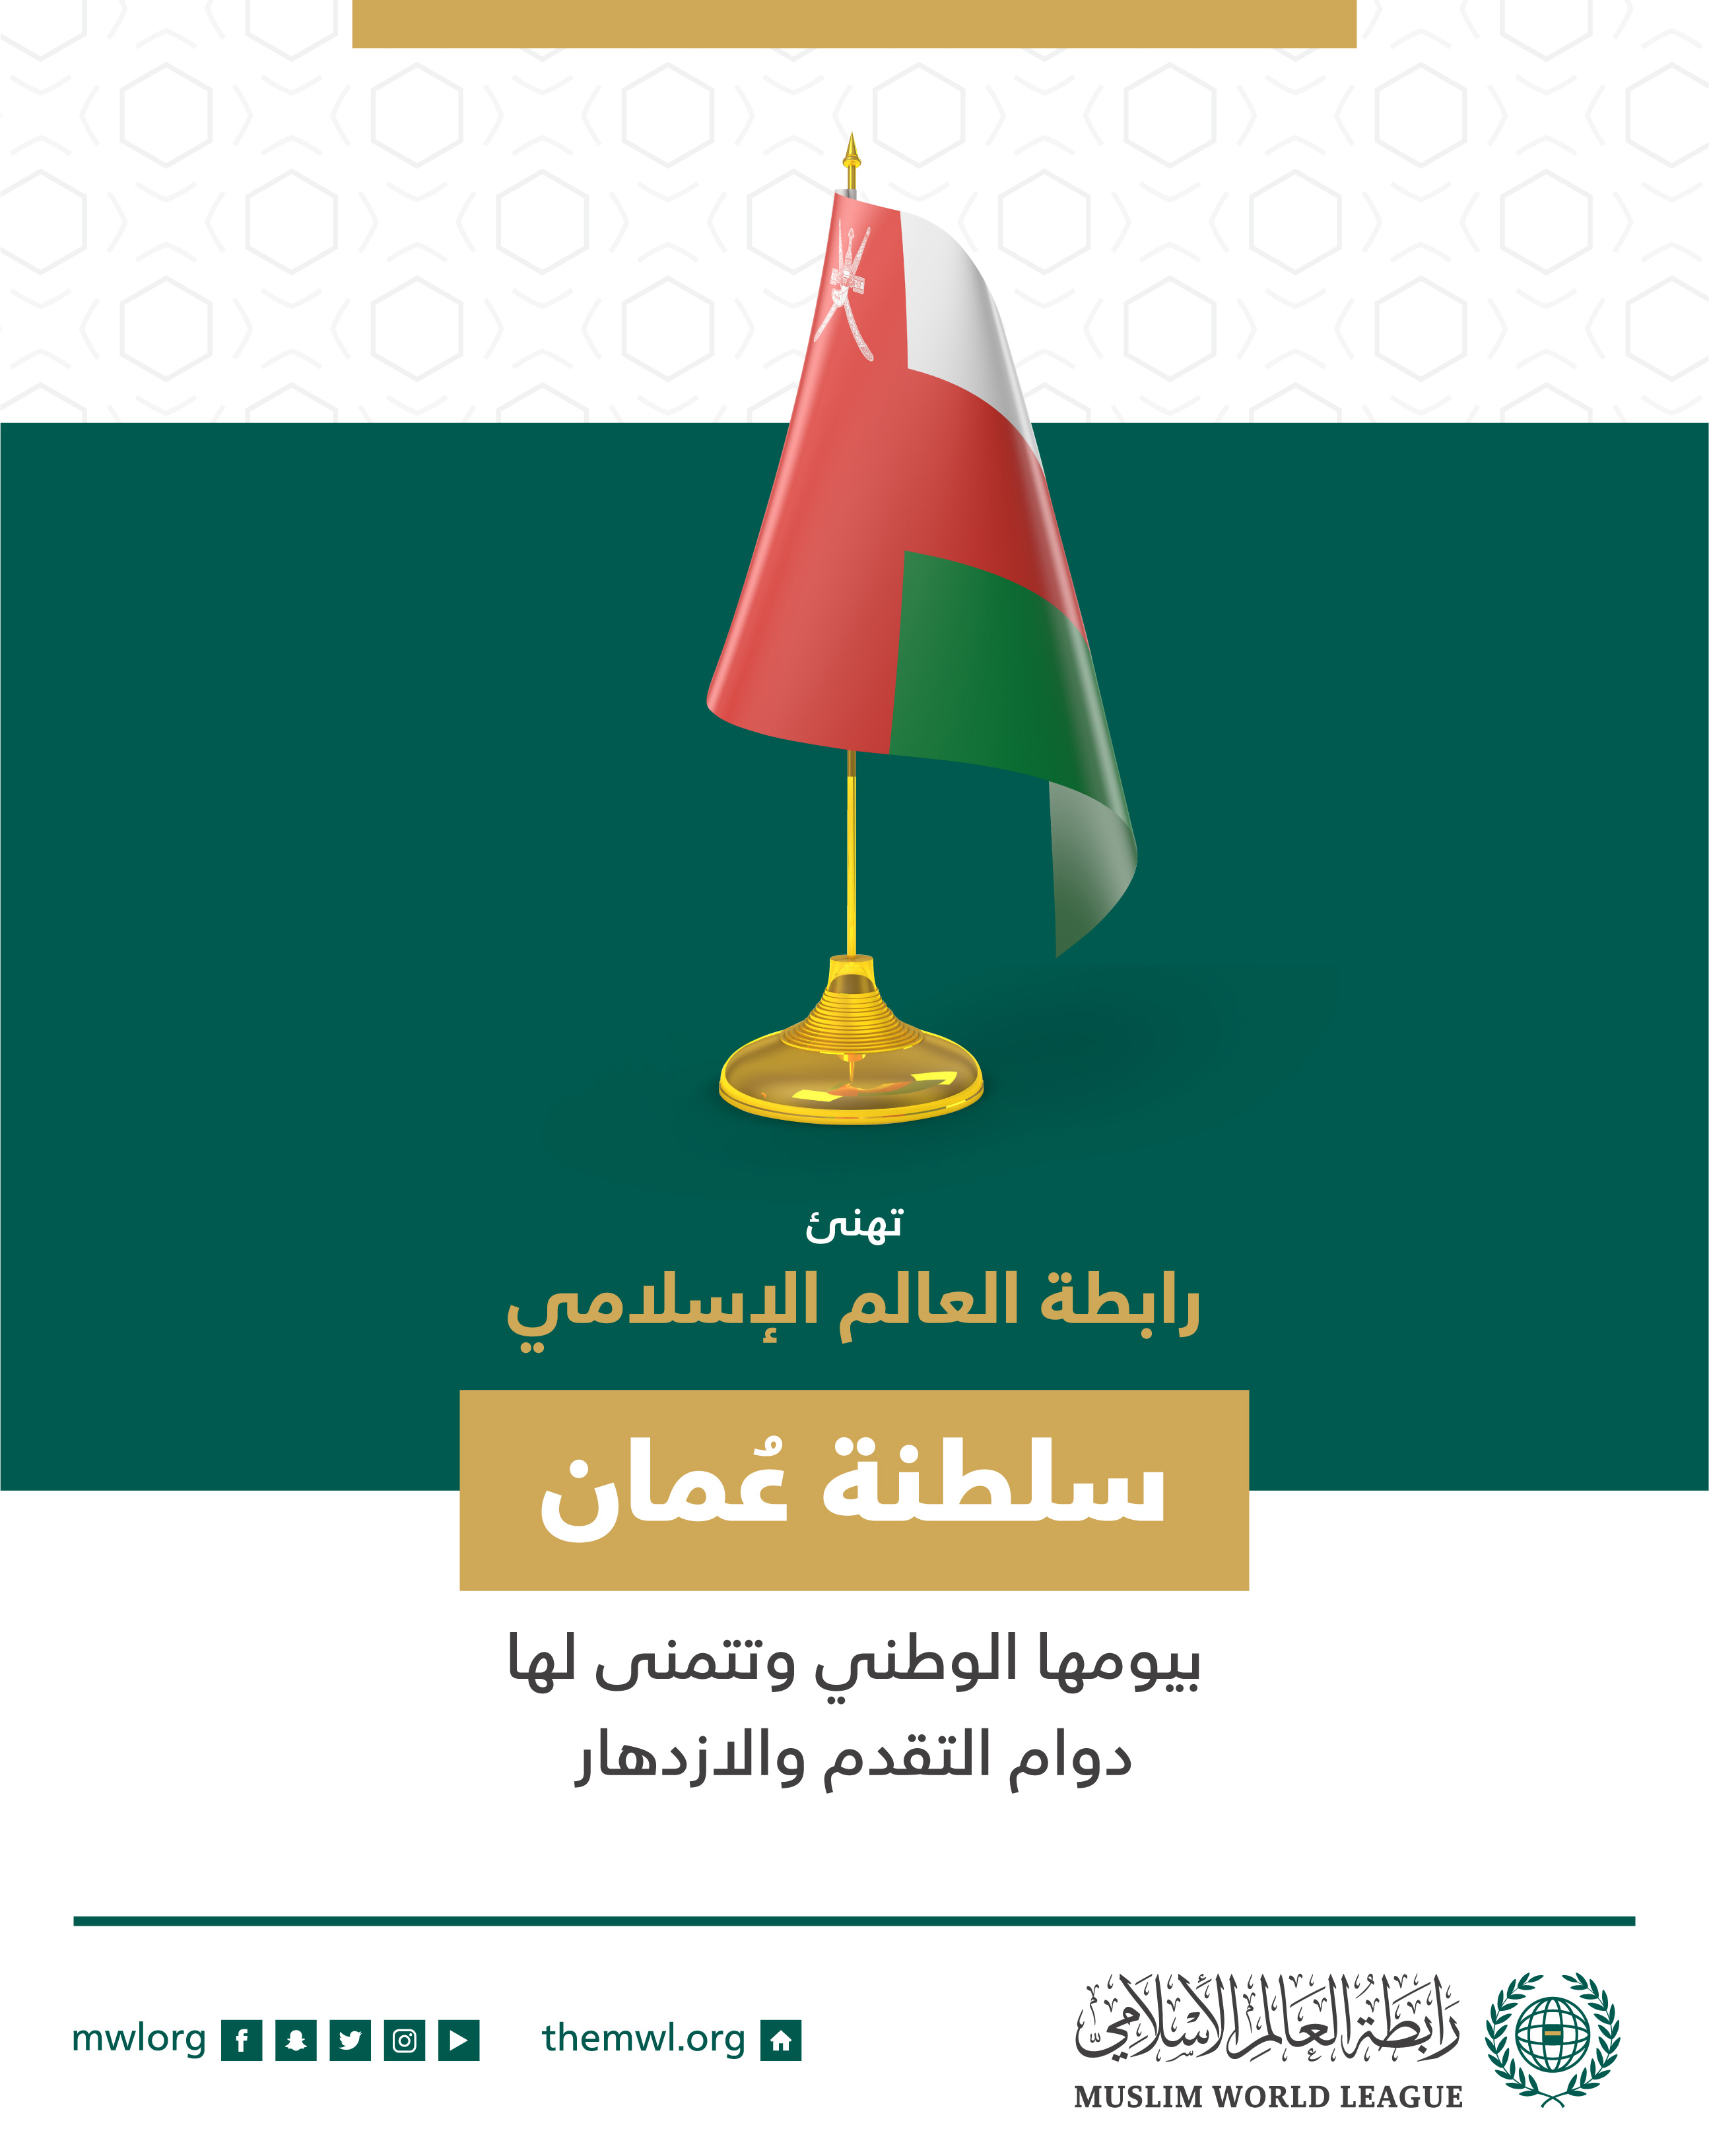 The Muslim World League congratulates the Sultanate of Oman on their 51st National Day!